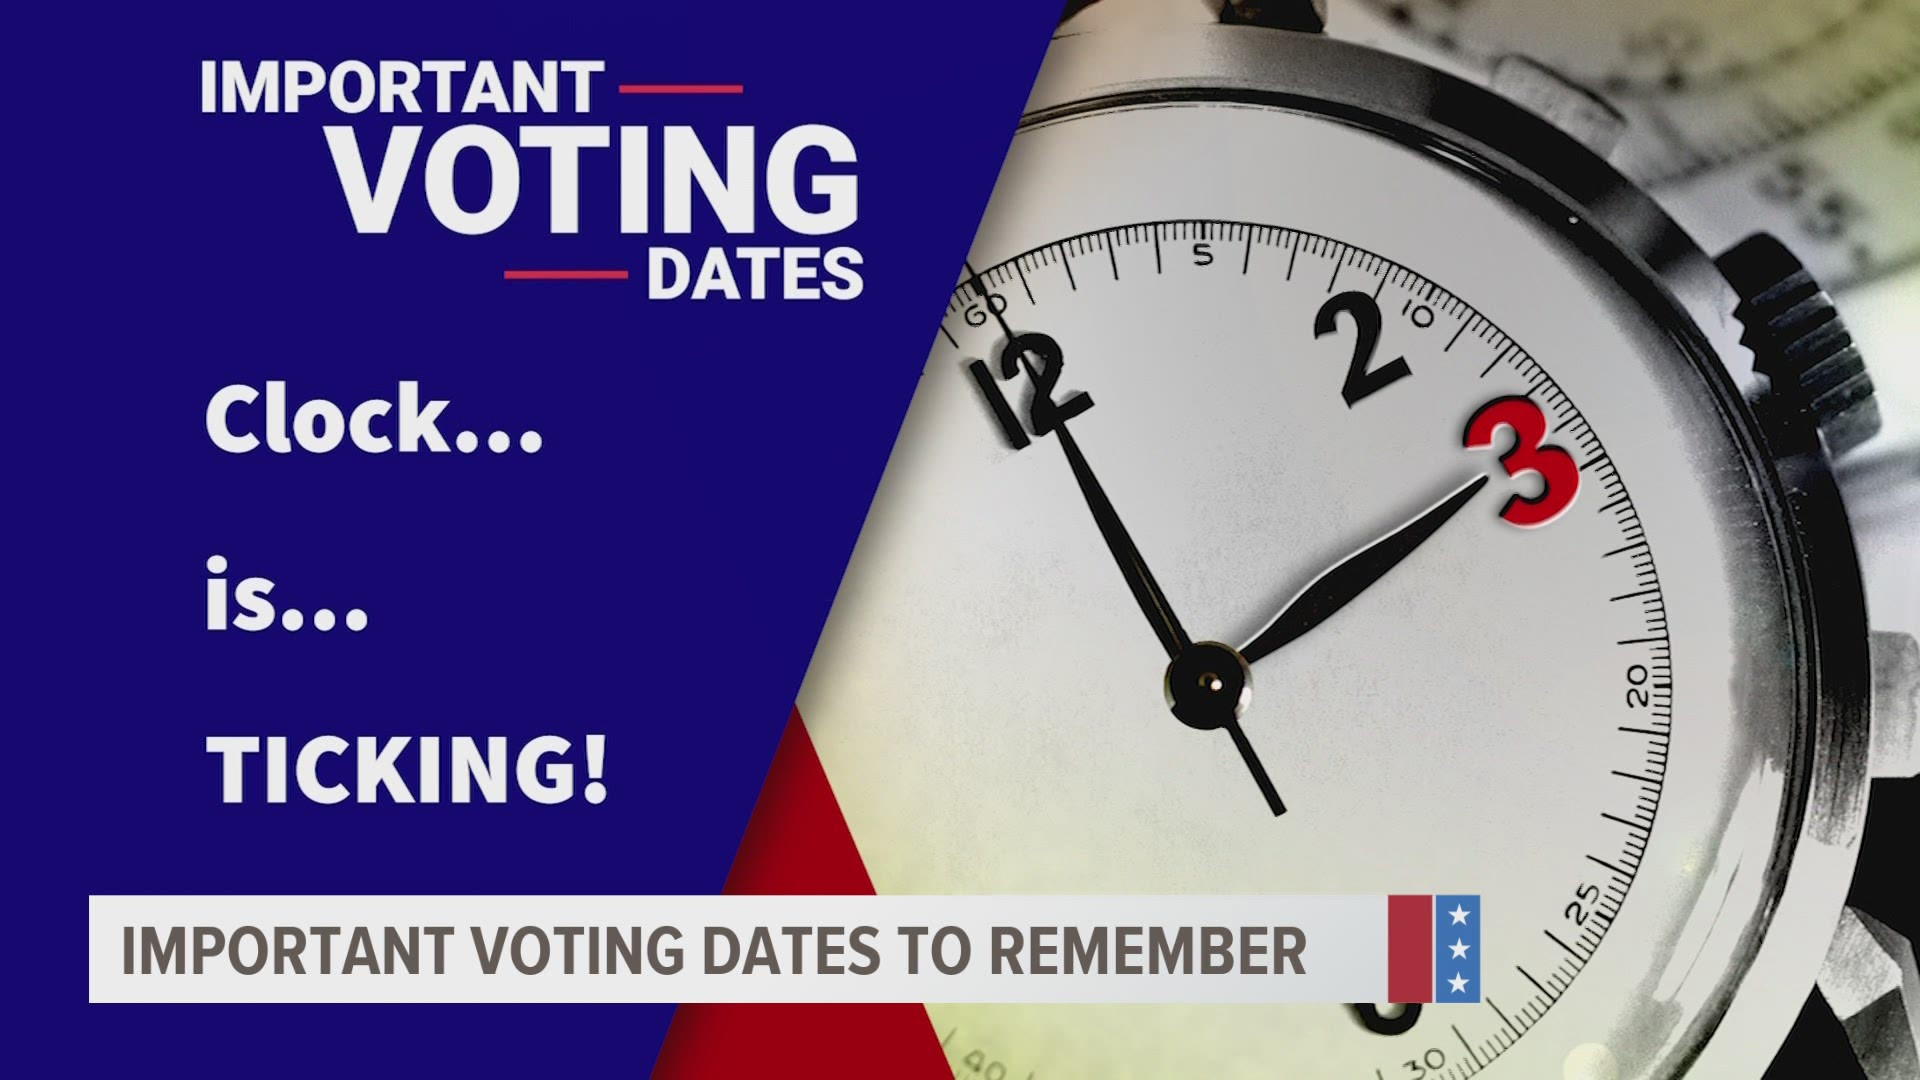 Important dates ahead as we near the end of the election